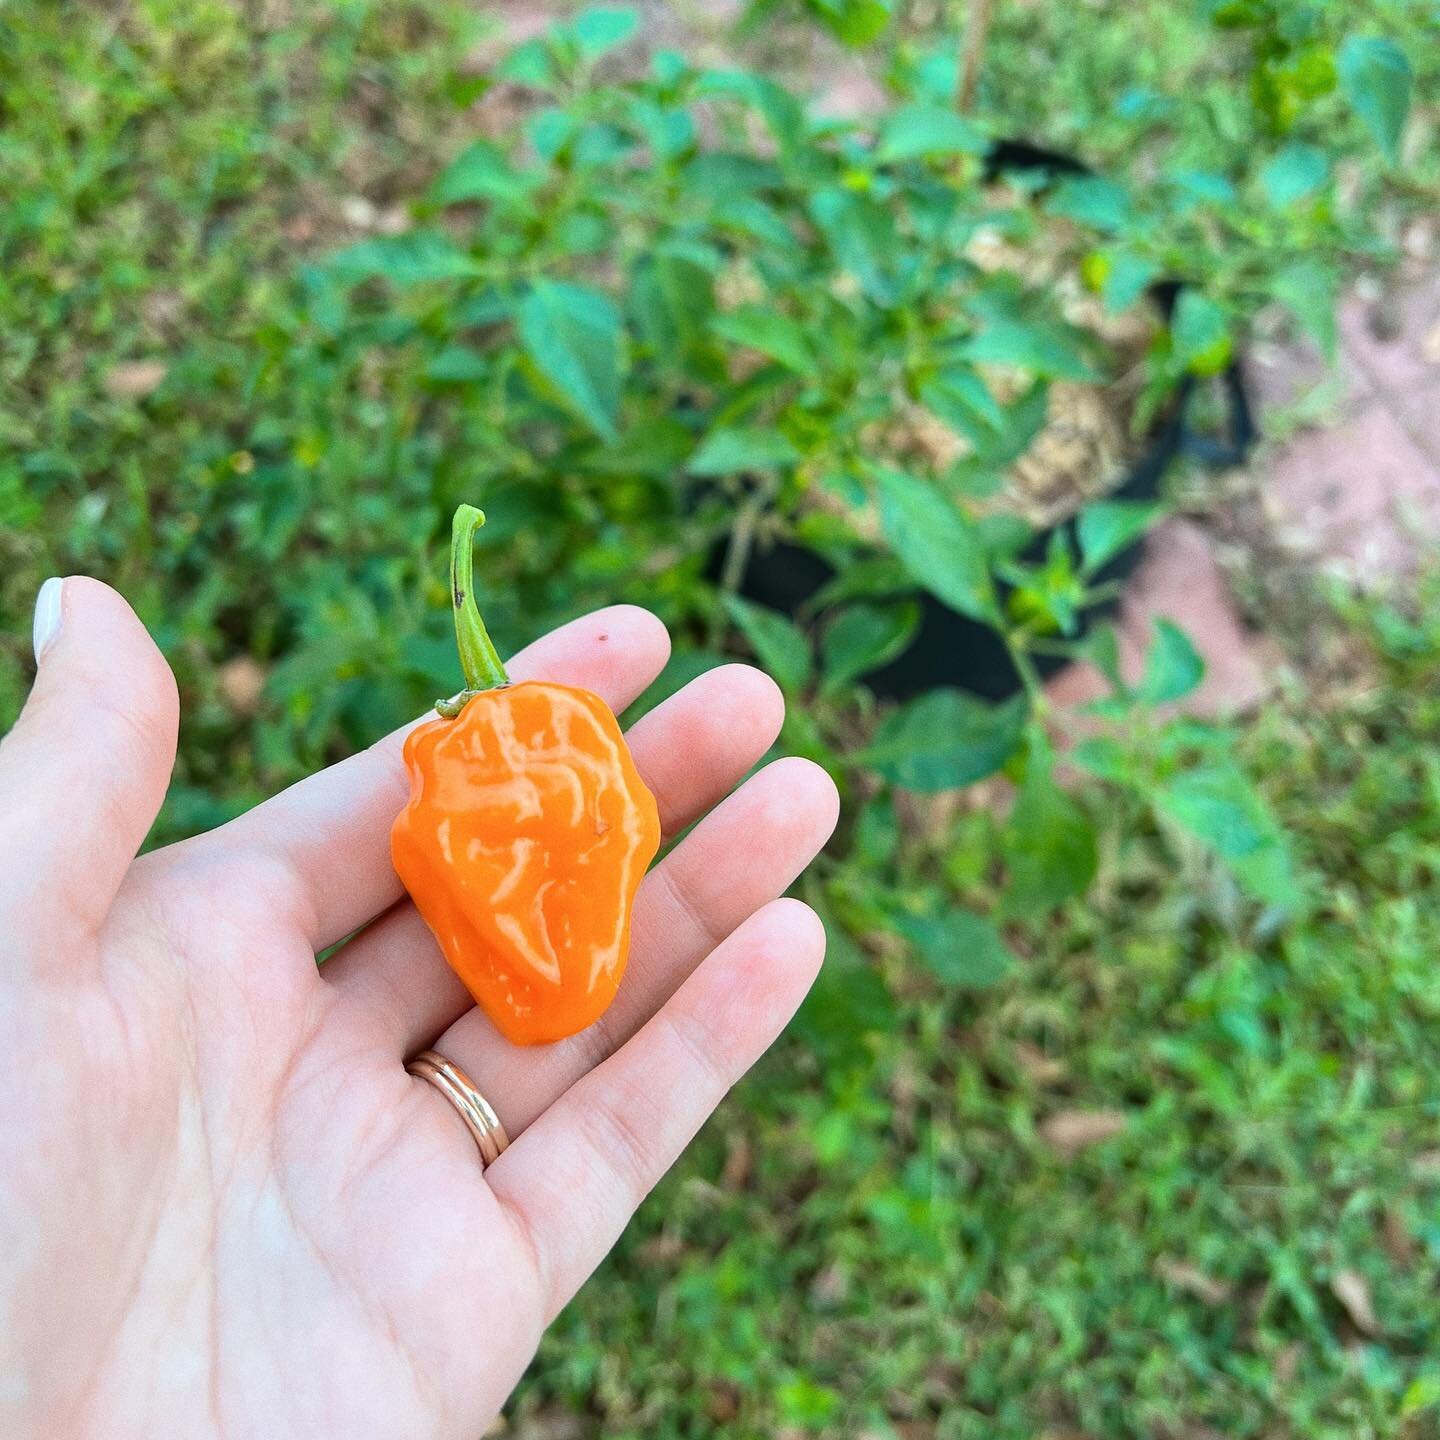 In 2023, we started our pepper plants but it was a slow start due to several factors including learning a new growing climate. But toward the end of the year, our habanero plants really came through and produced some beautiful peppers. Stay tuned for